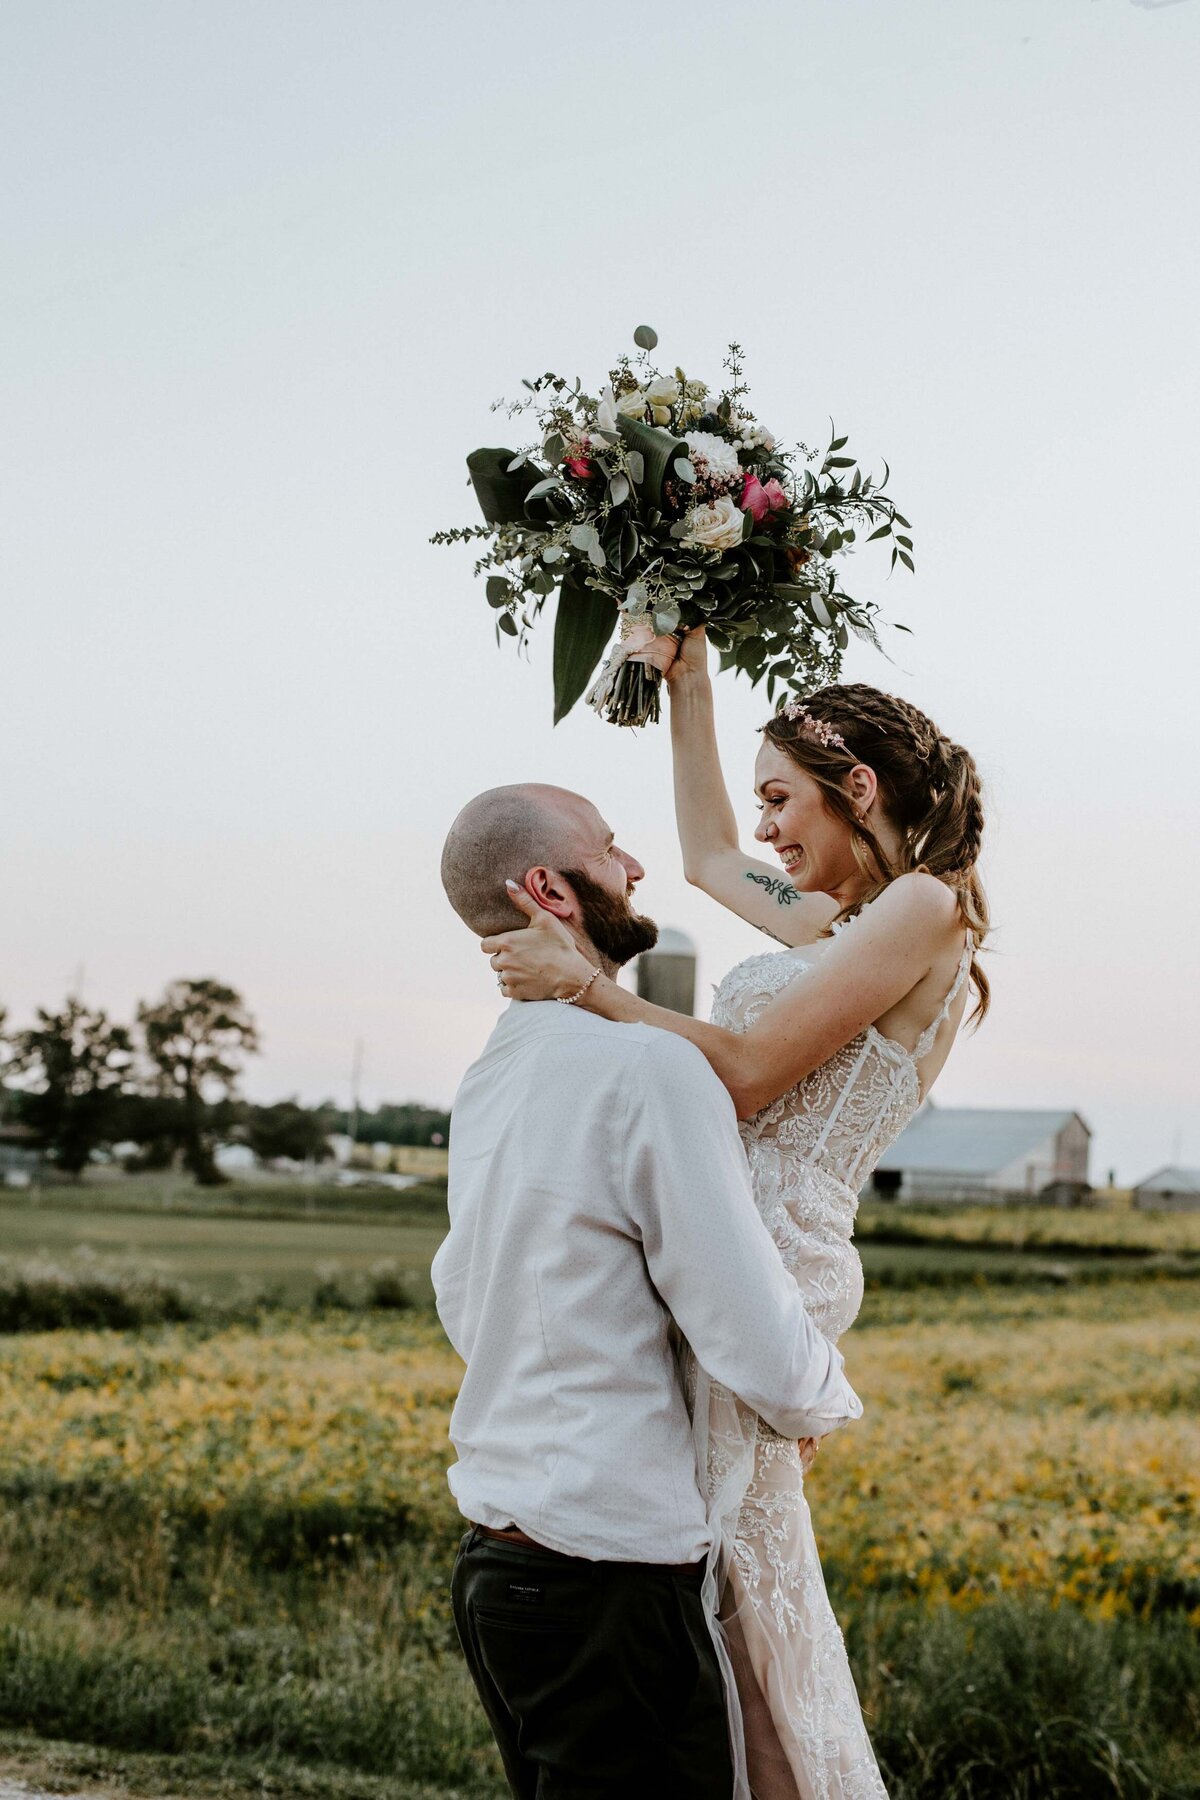 Groom lifting his bride for fun wedding day photo in Exeter, Ontario with barns and pastures behind them. Bride's forearm is holding the groom's neck and her back arm is raising a large bouquet.